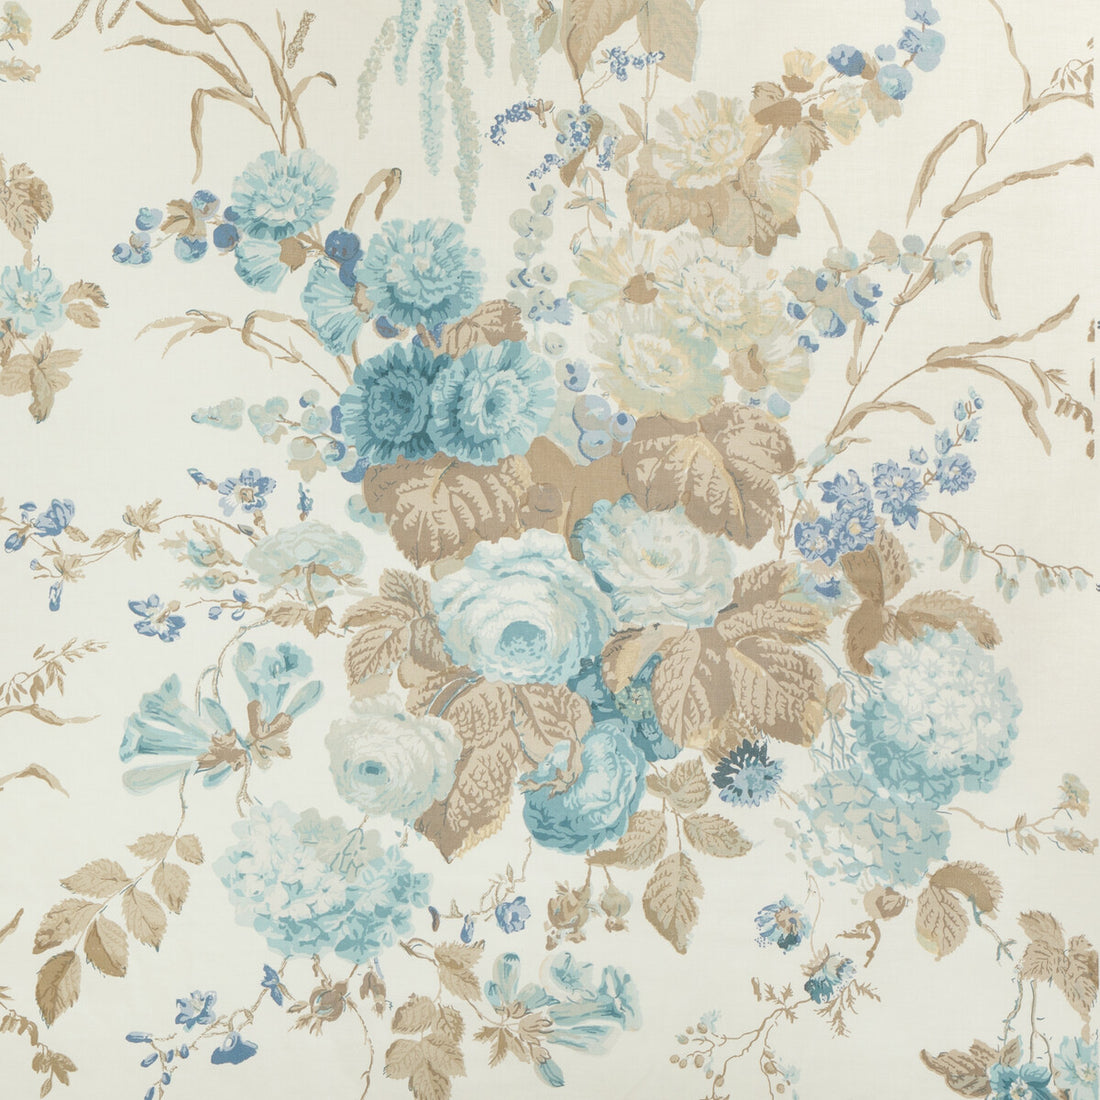 Floral Bouquet fabric in aqua/dune color - pattern 2023120.635.0 - by Lee Jofa in the Lee Jofa 200 collection